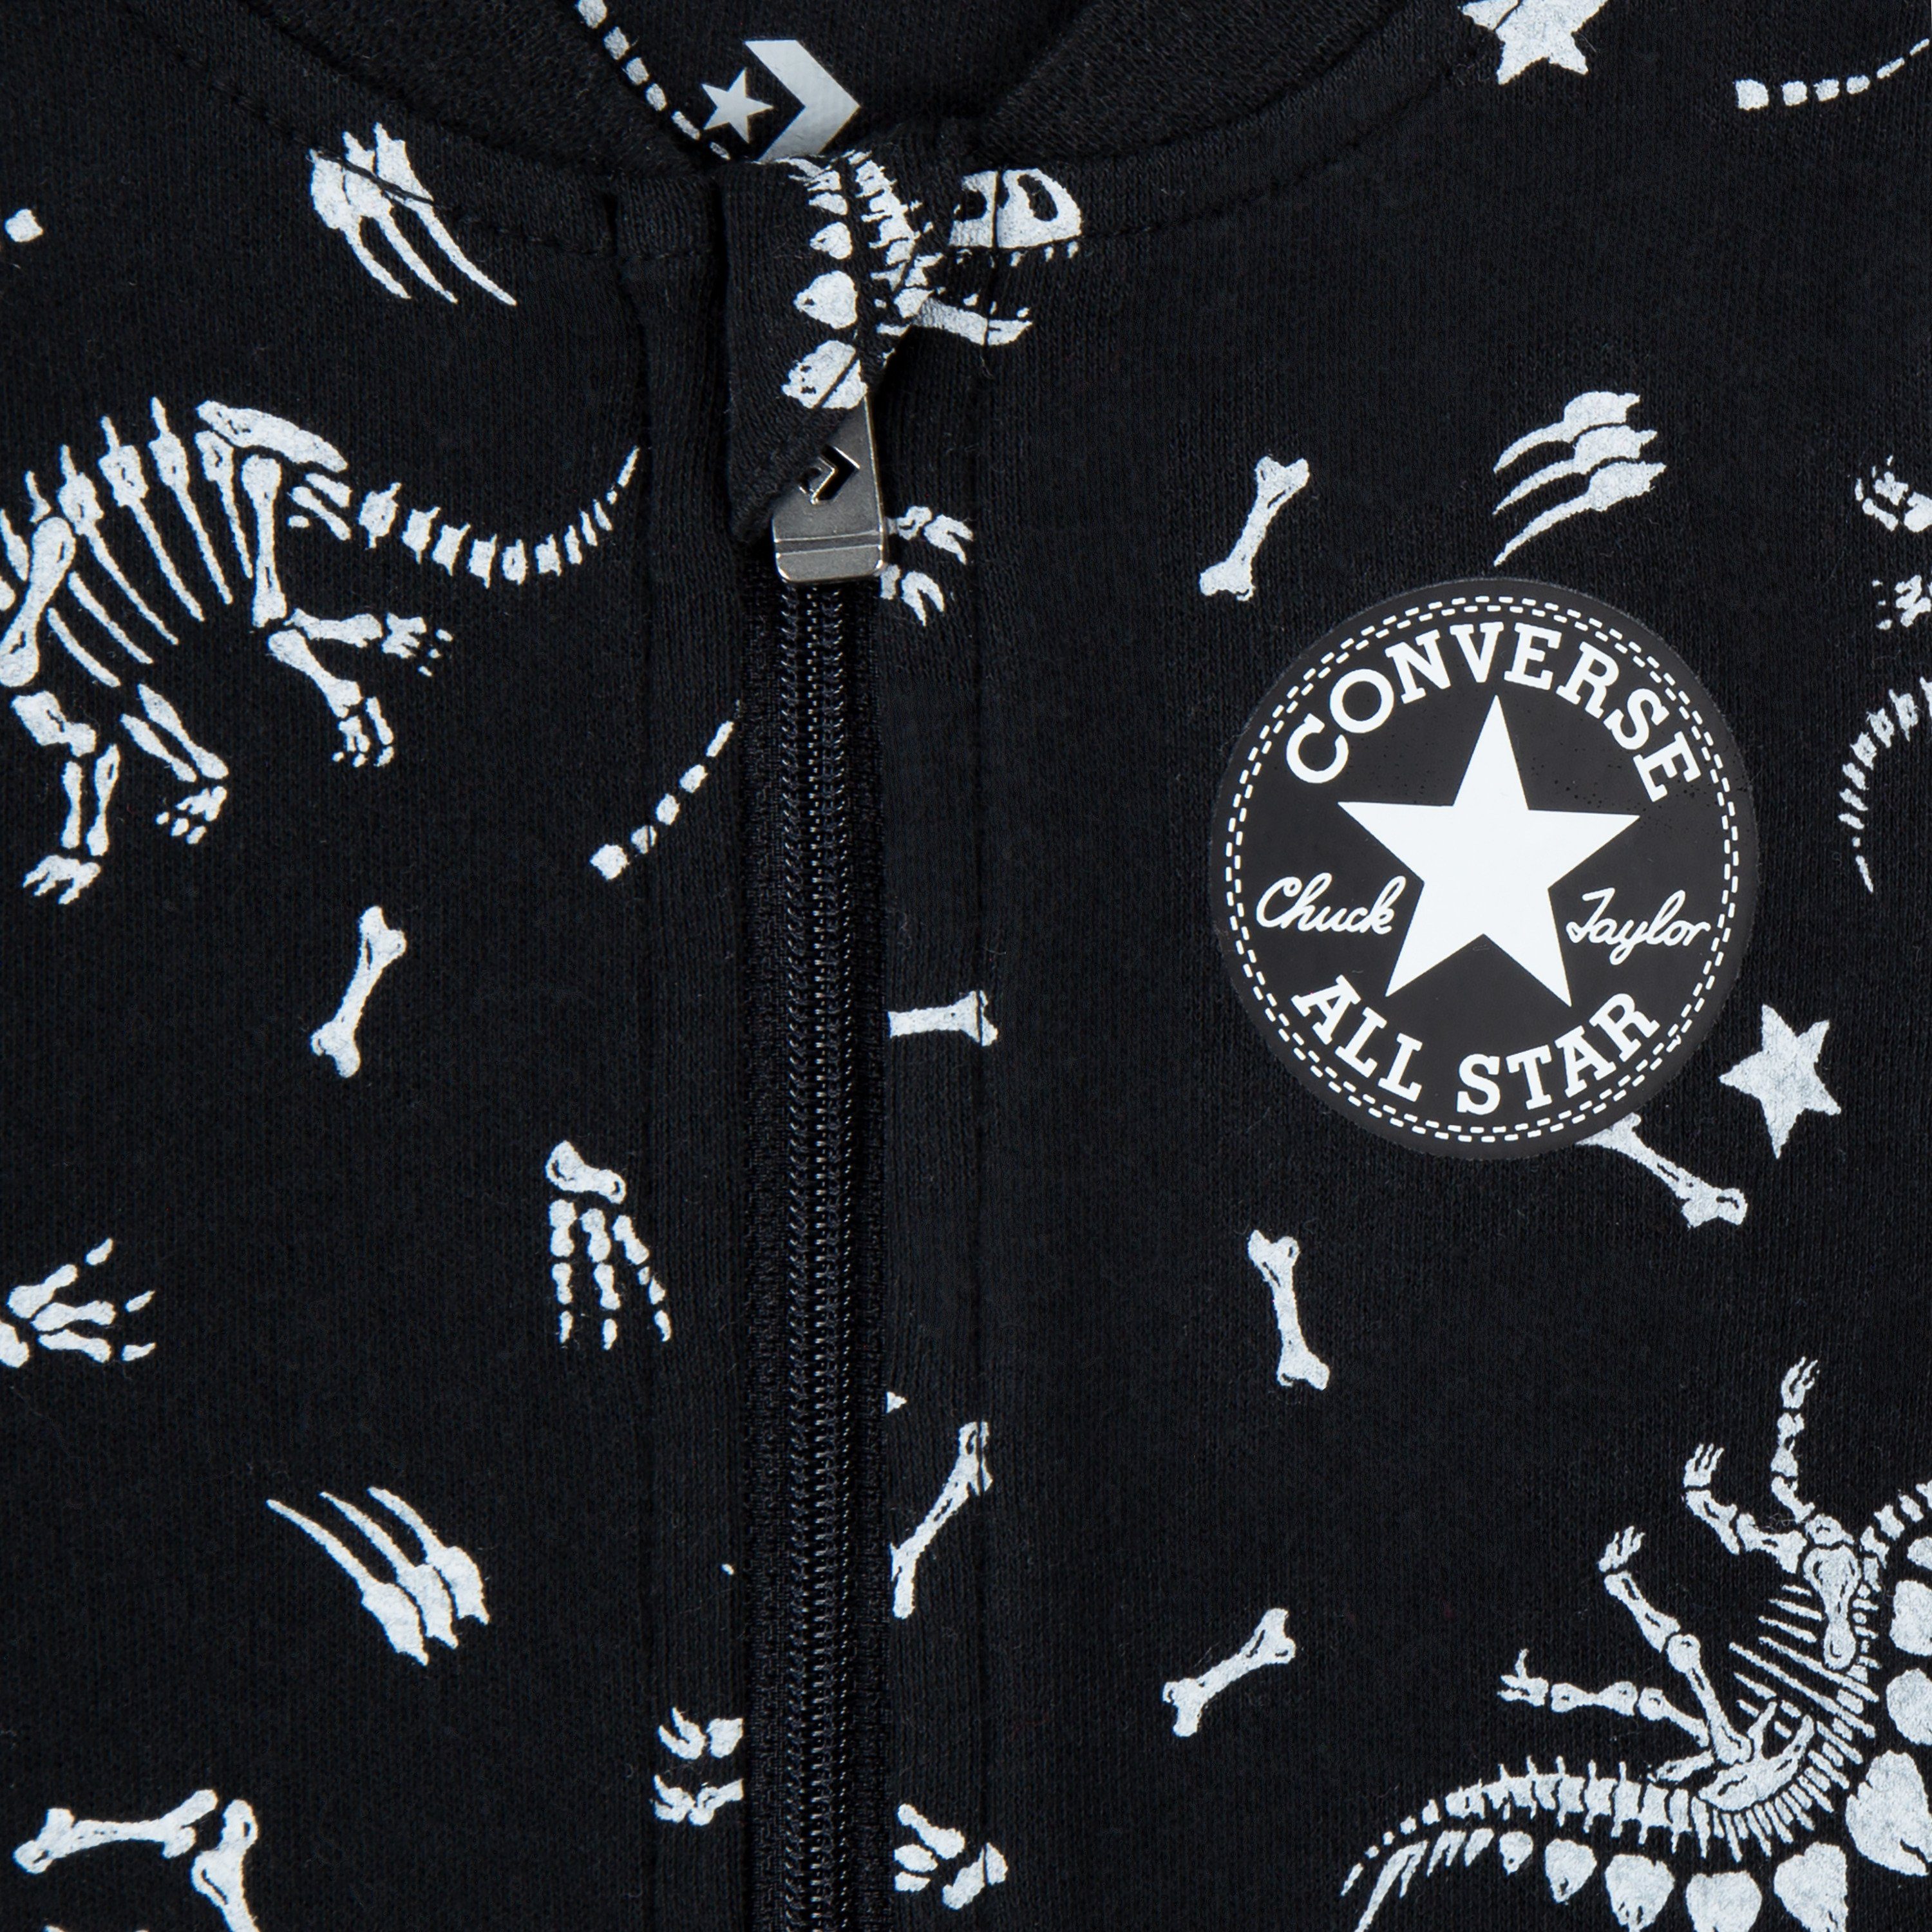 Converse Strampler DINOS COVERALL FOOTED